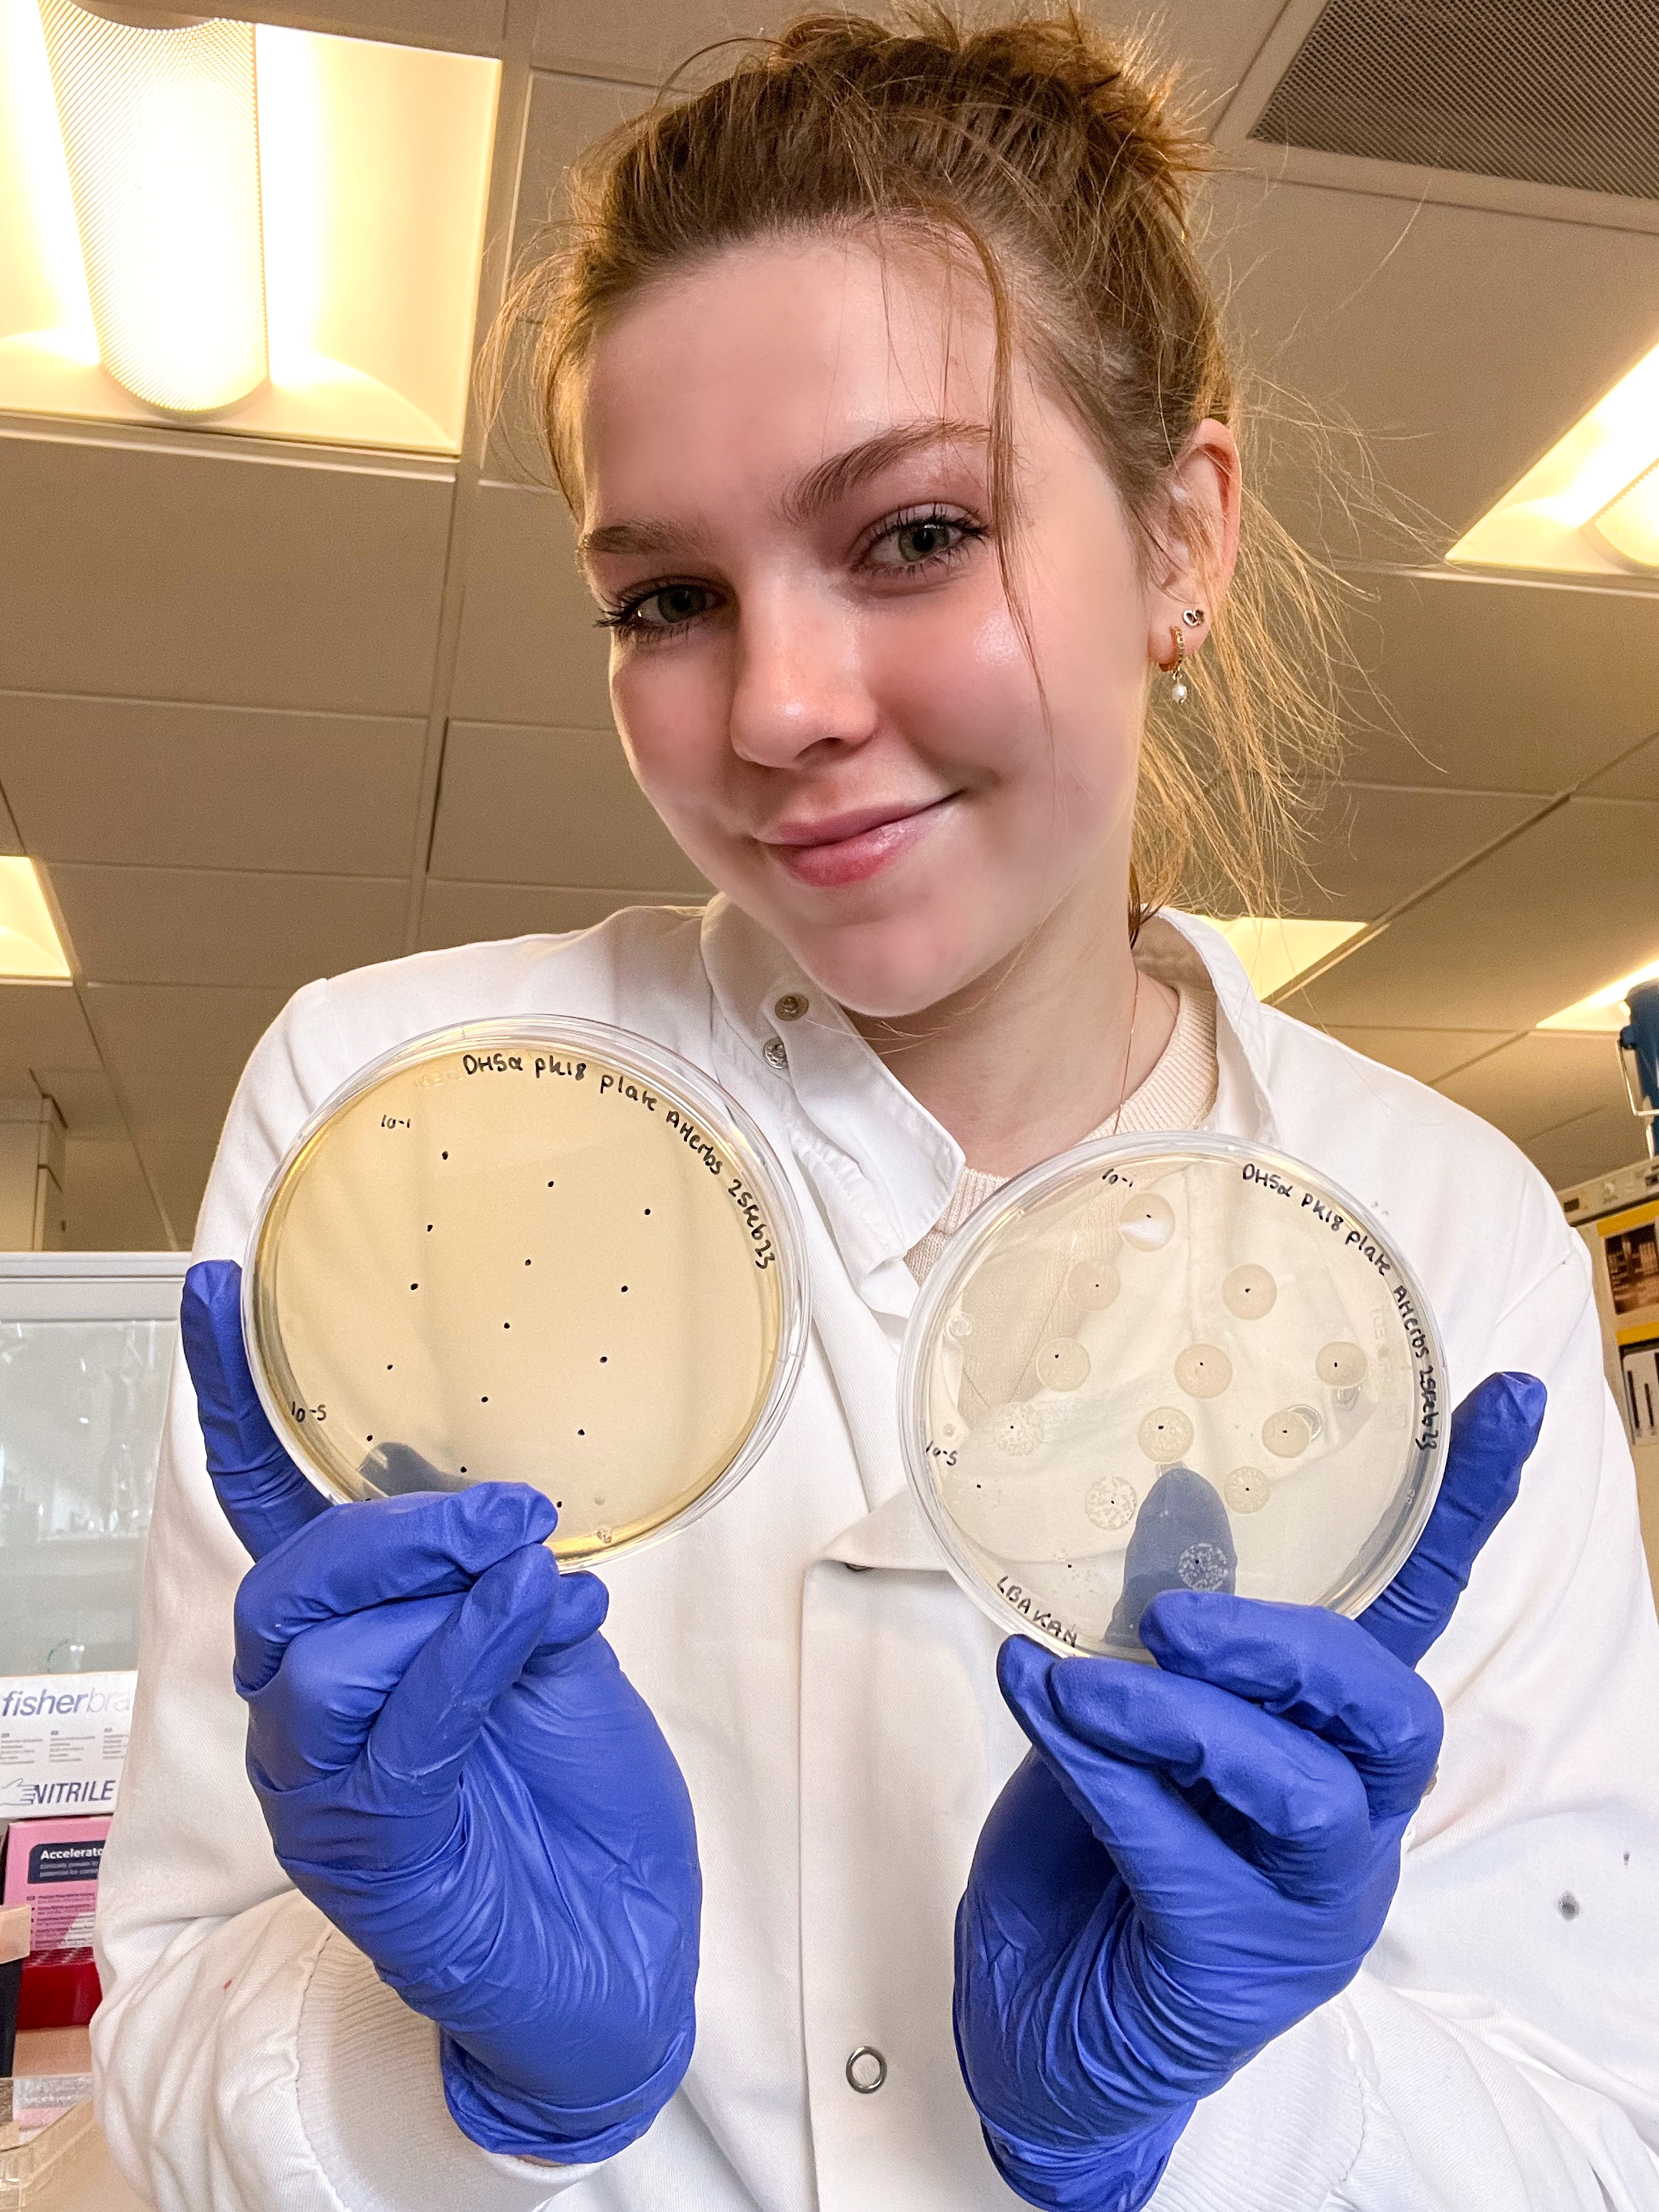 Arianwen holding two petri dishes. She is wearing a white lab coat and blue gloves.